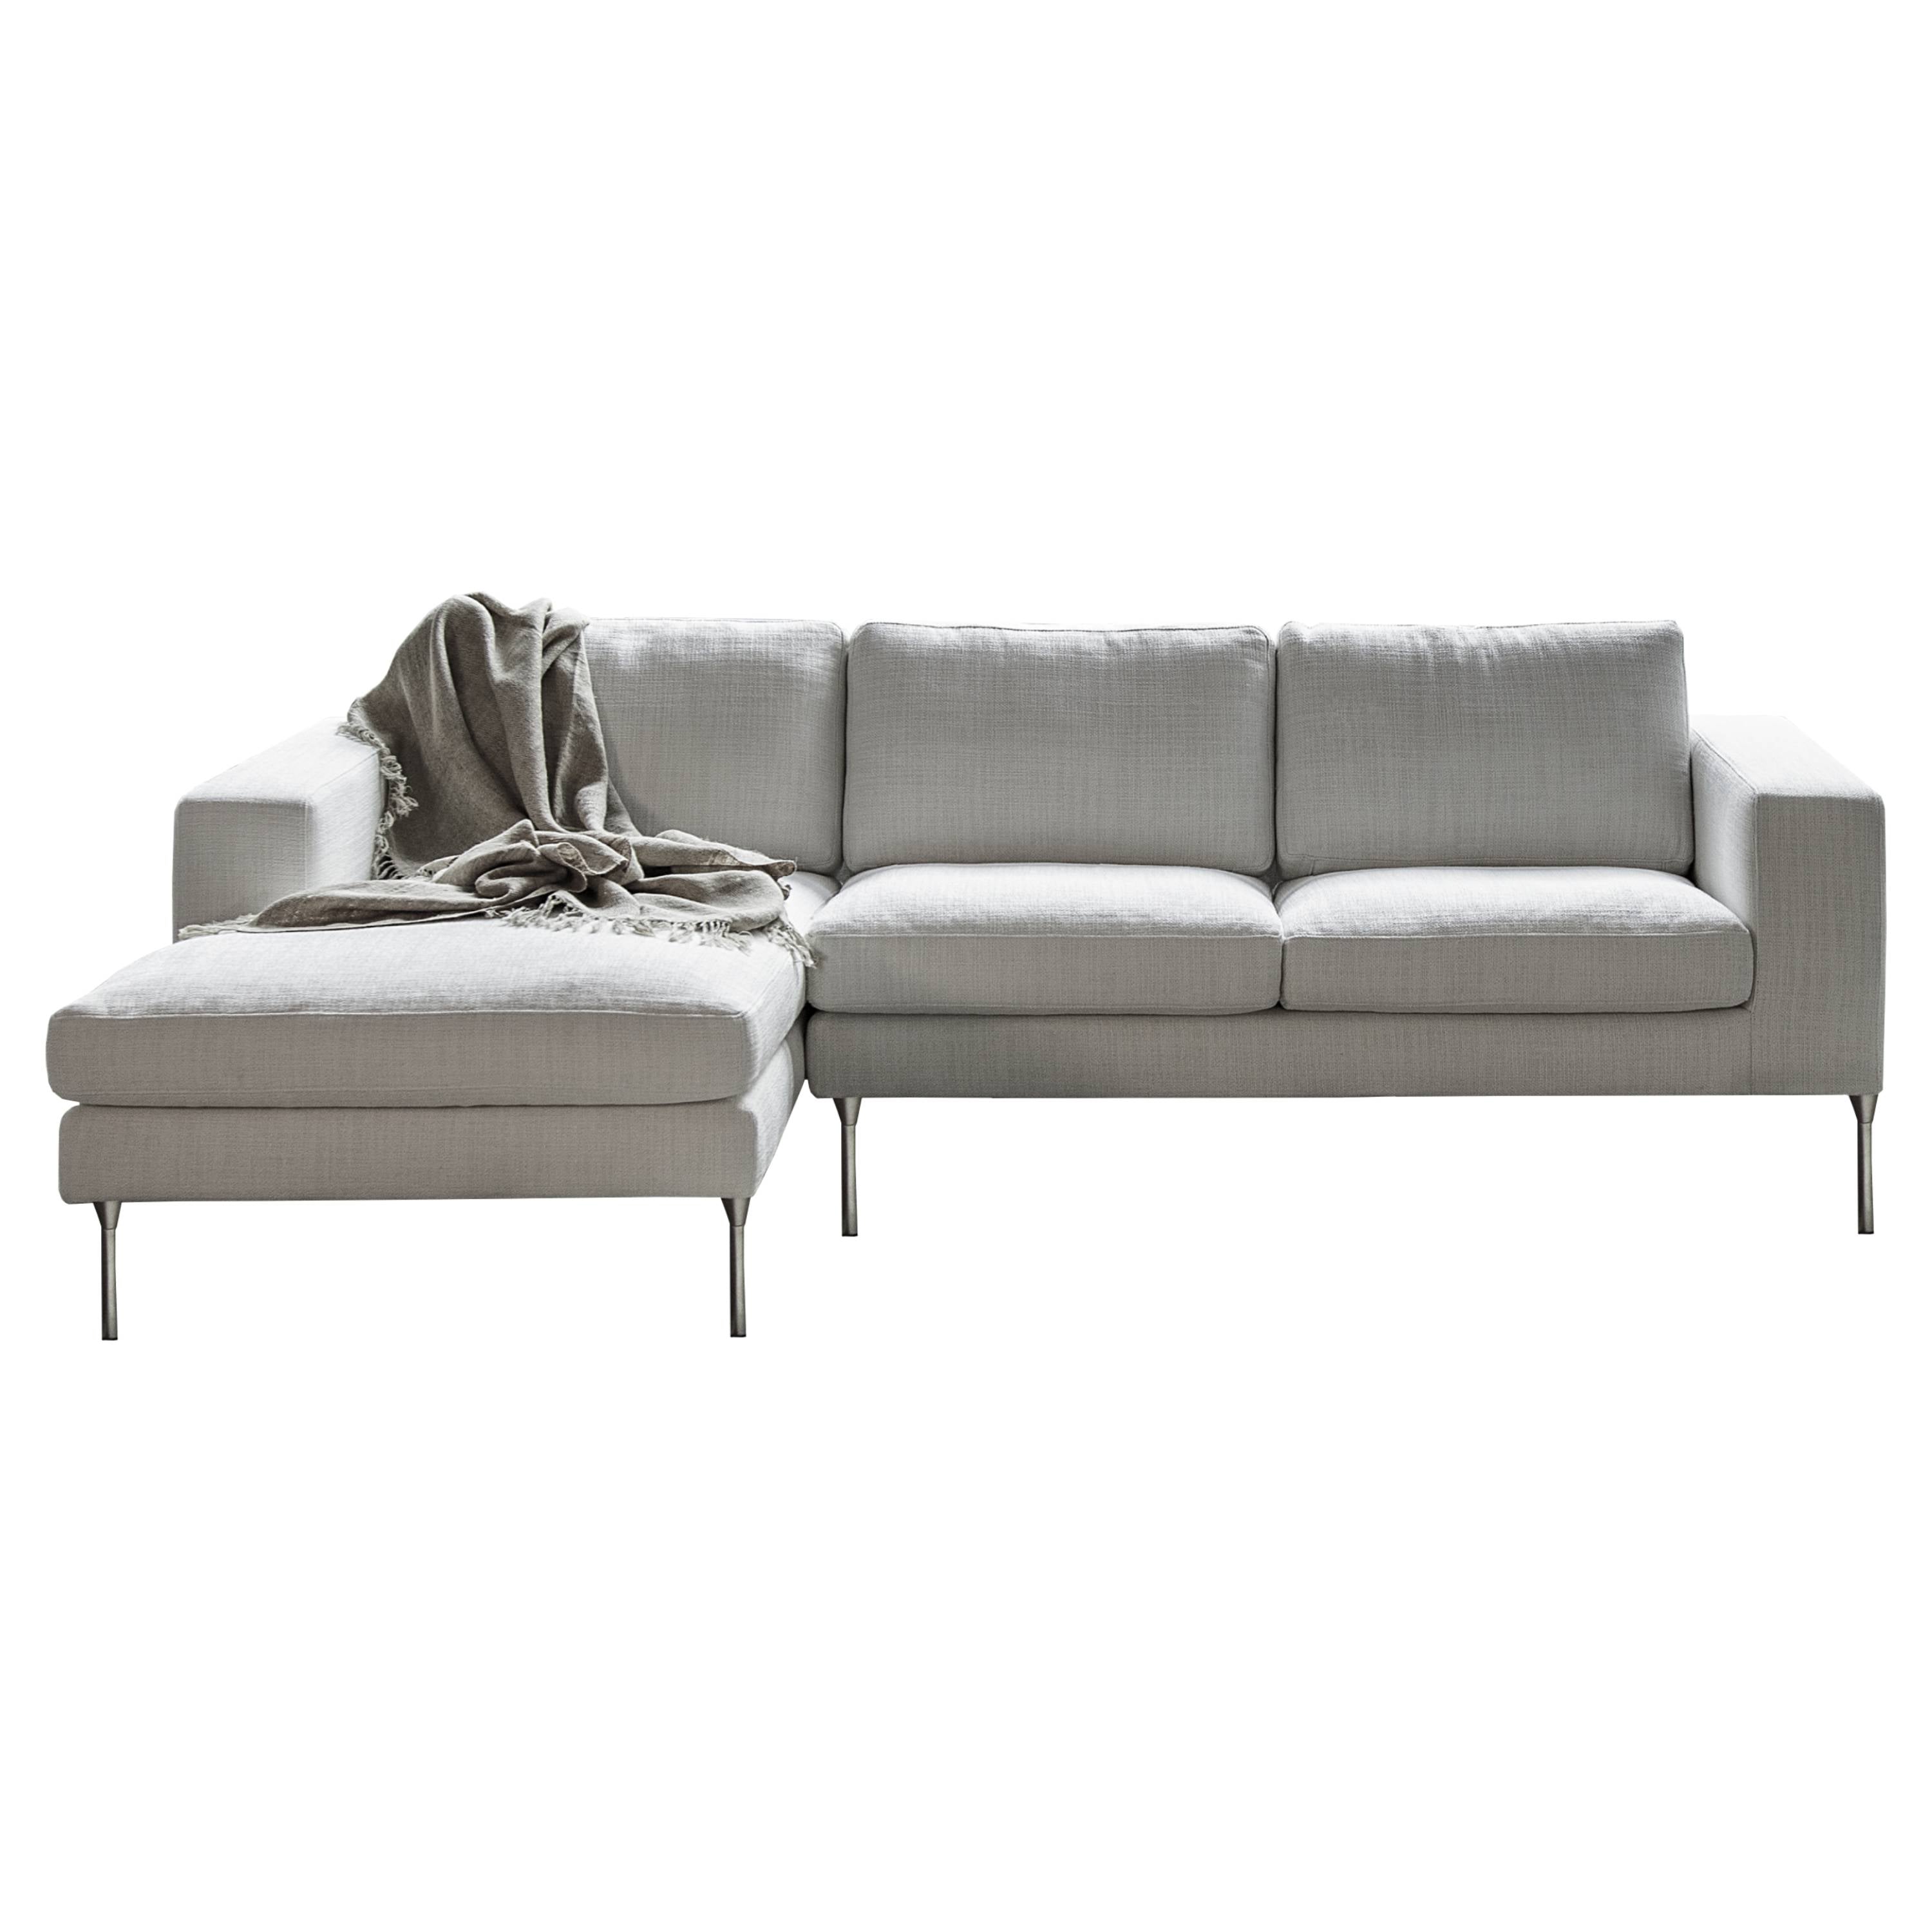 Neo Sectional Sofa Pieces: 2 Seater - Right + Chaise - Left